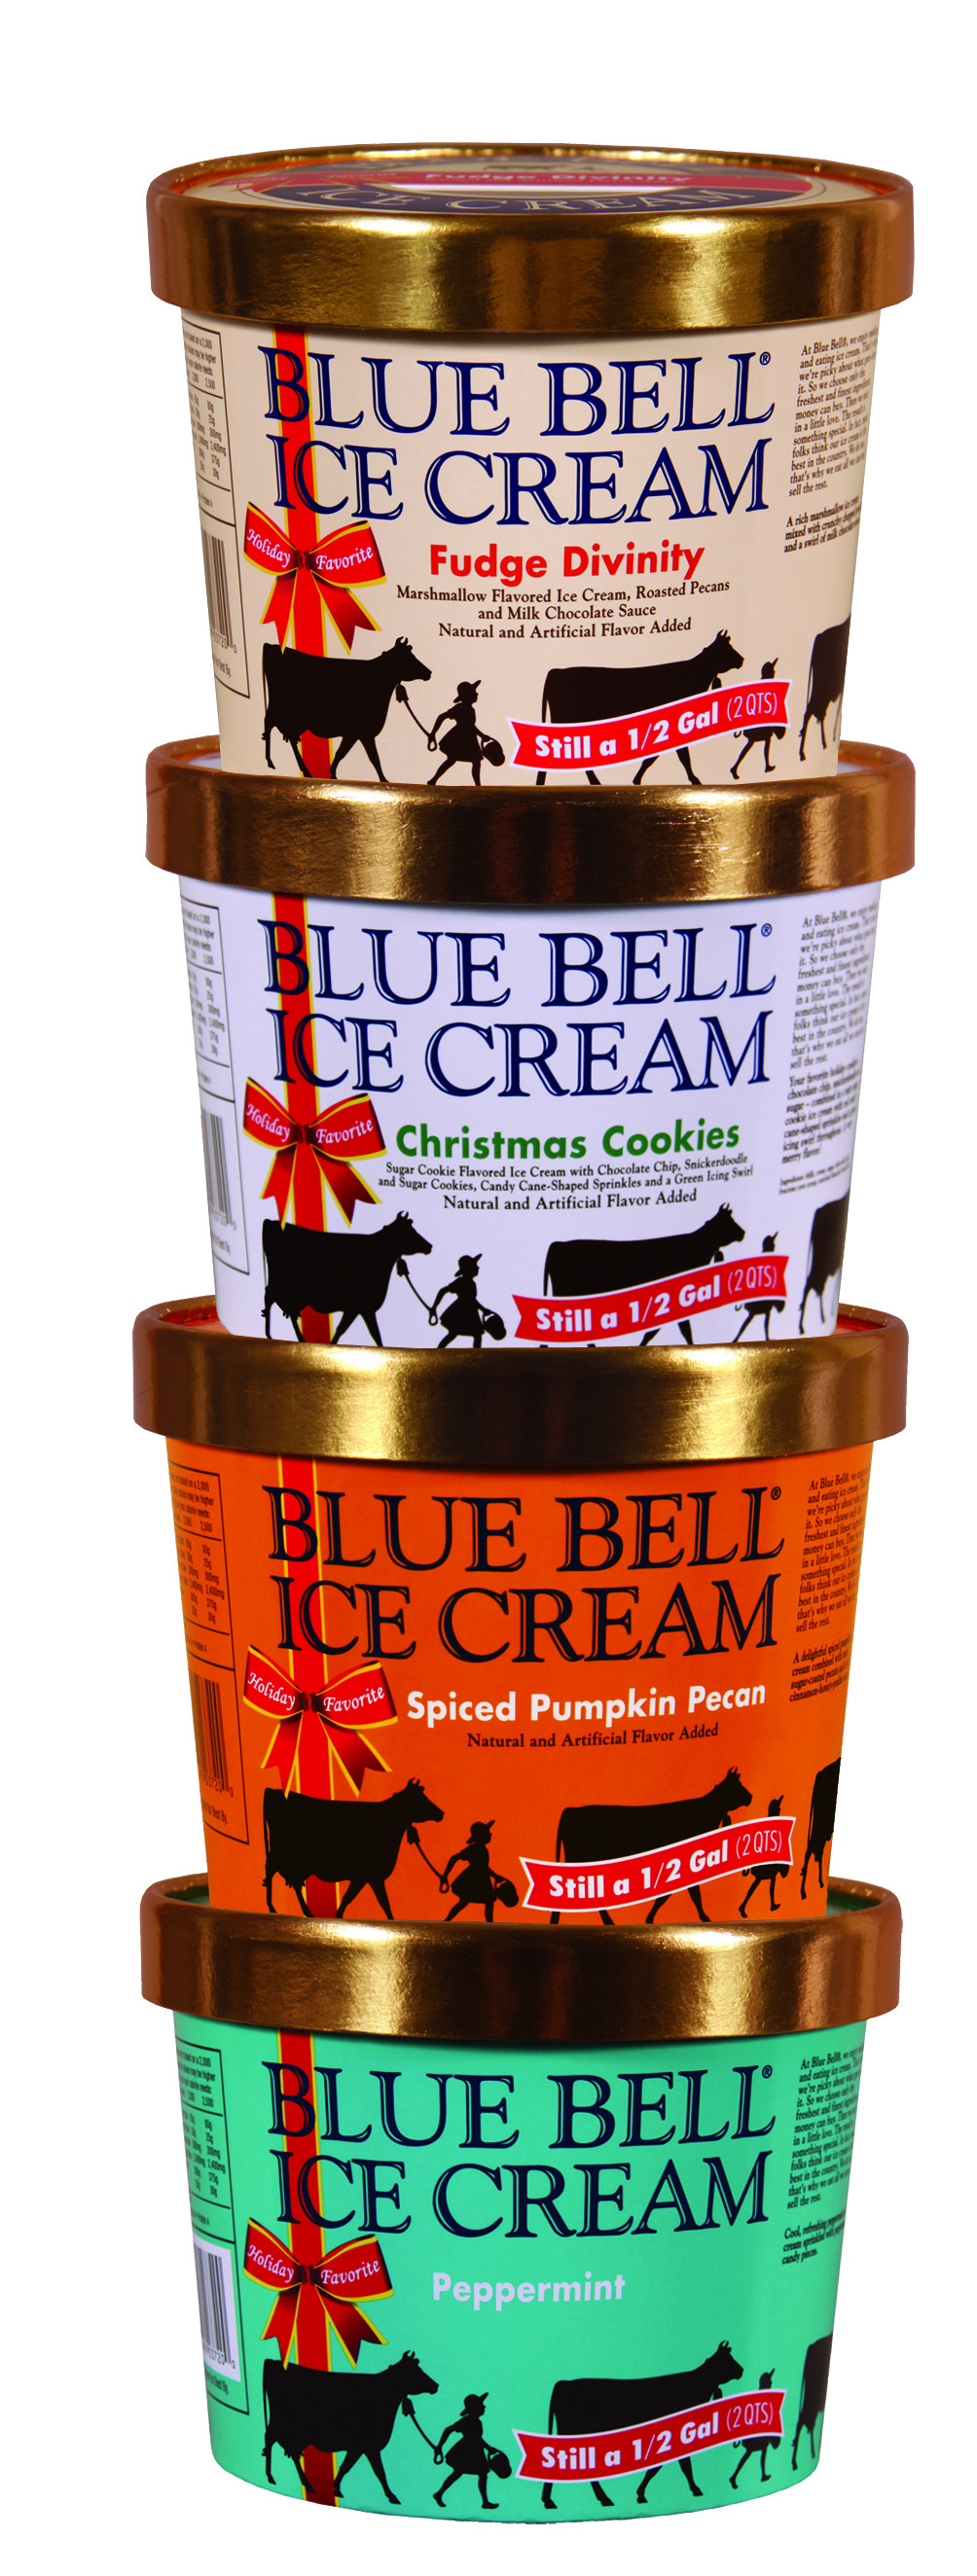 Blue Bell Ice Cream Christmas Cookies
 BLUE BELL INTRODUCES NEW HOLIDAY FAVORITE FUDGE DIVINITY